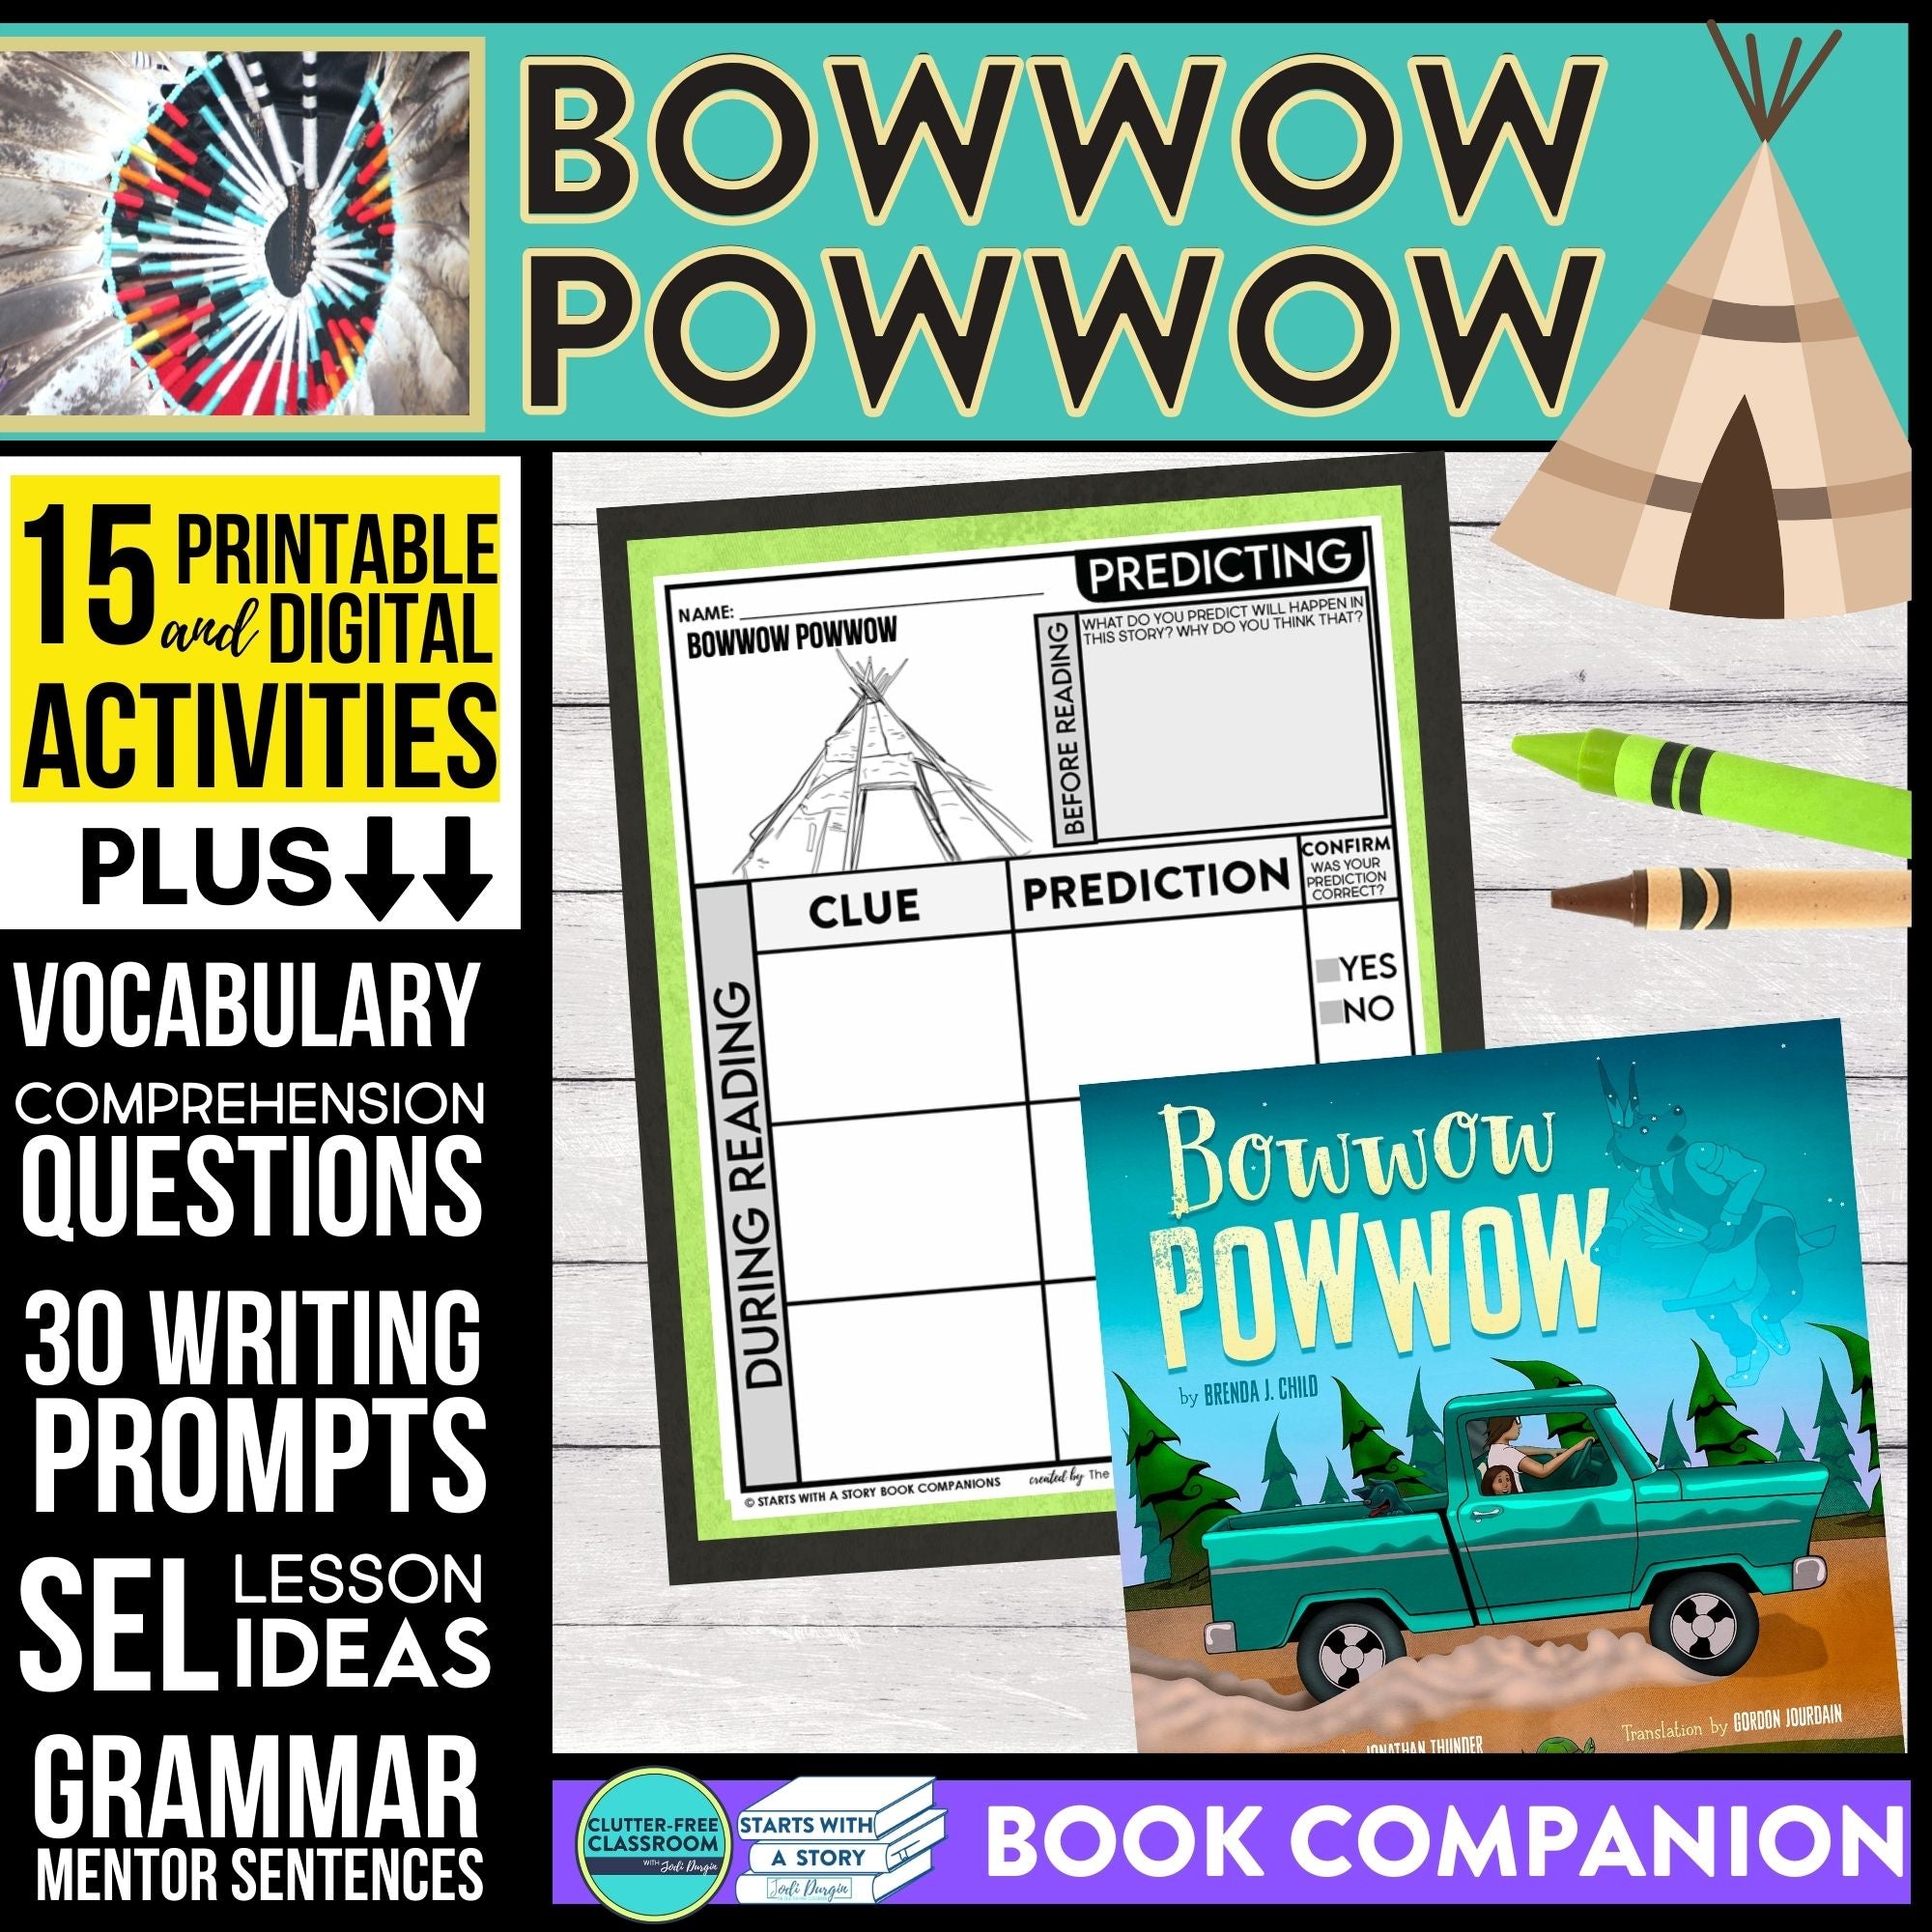 BOWWOW POWWOW activities and lesson plan ideas